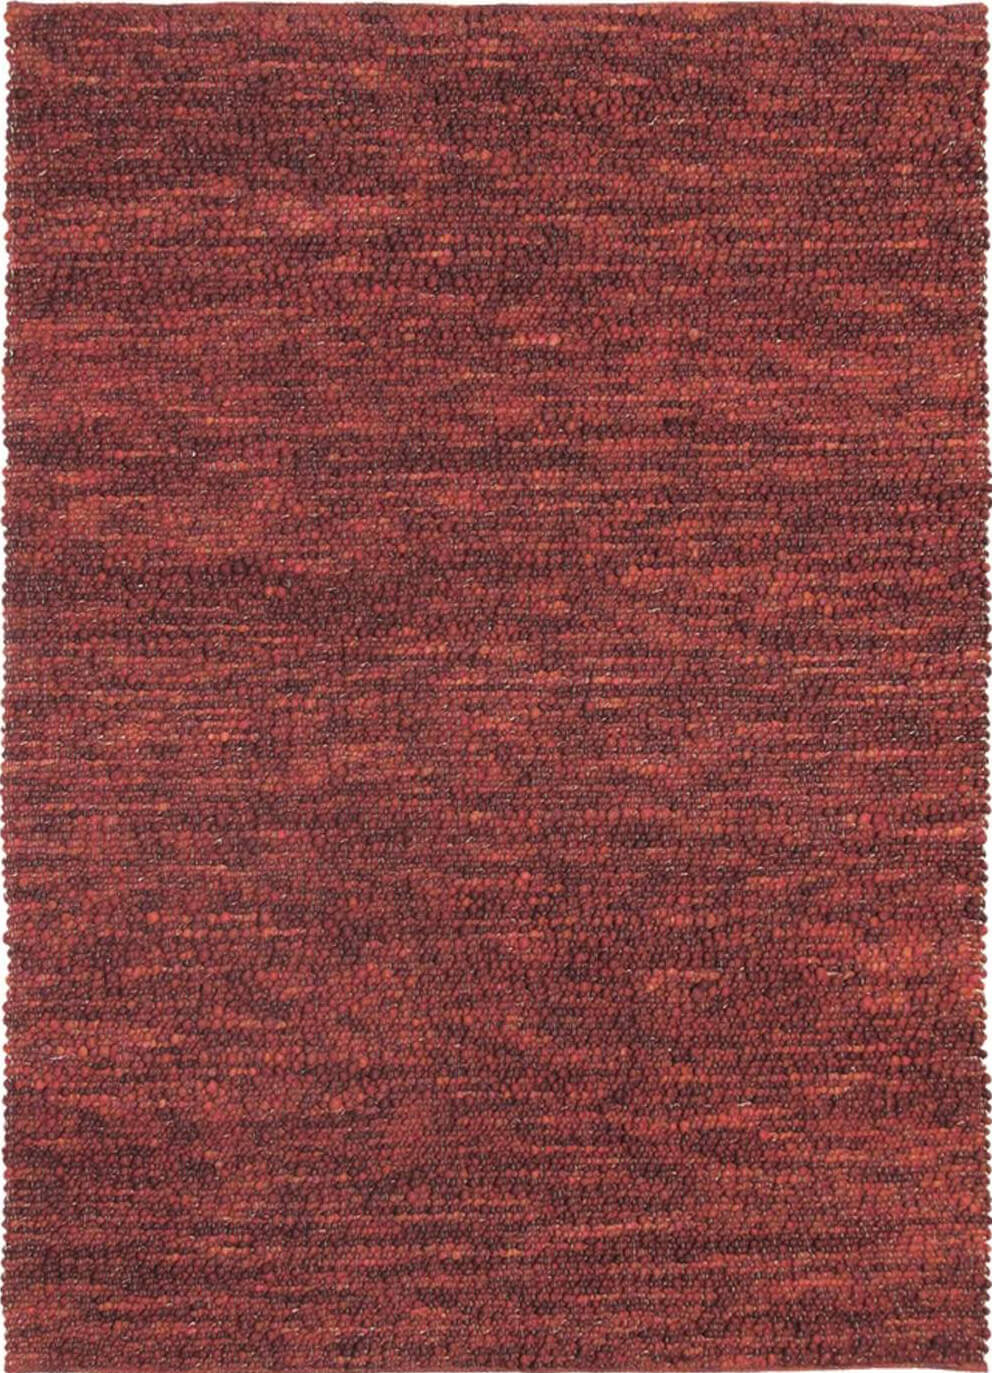 Stubble 29700 Rug by Brink & Campman